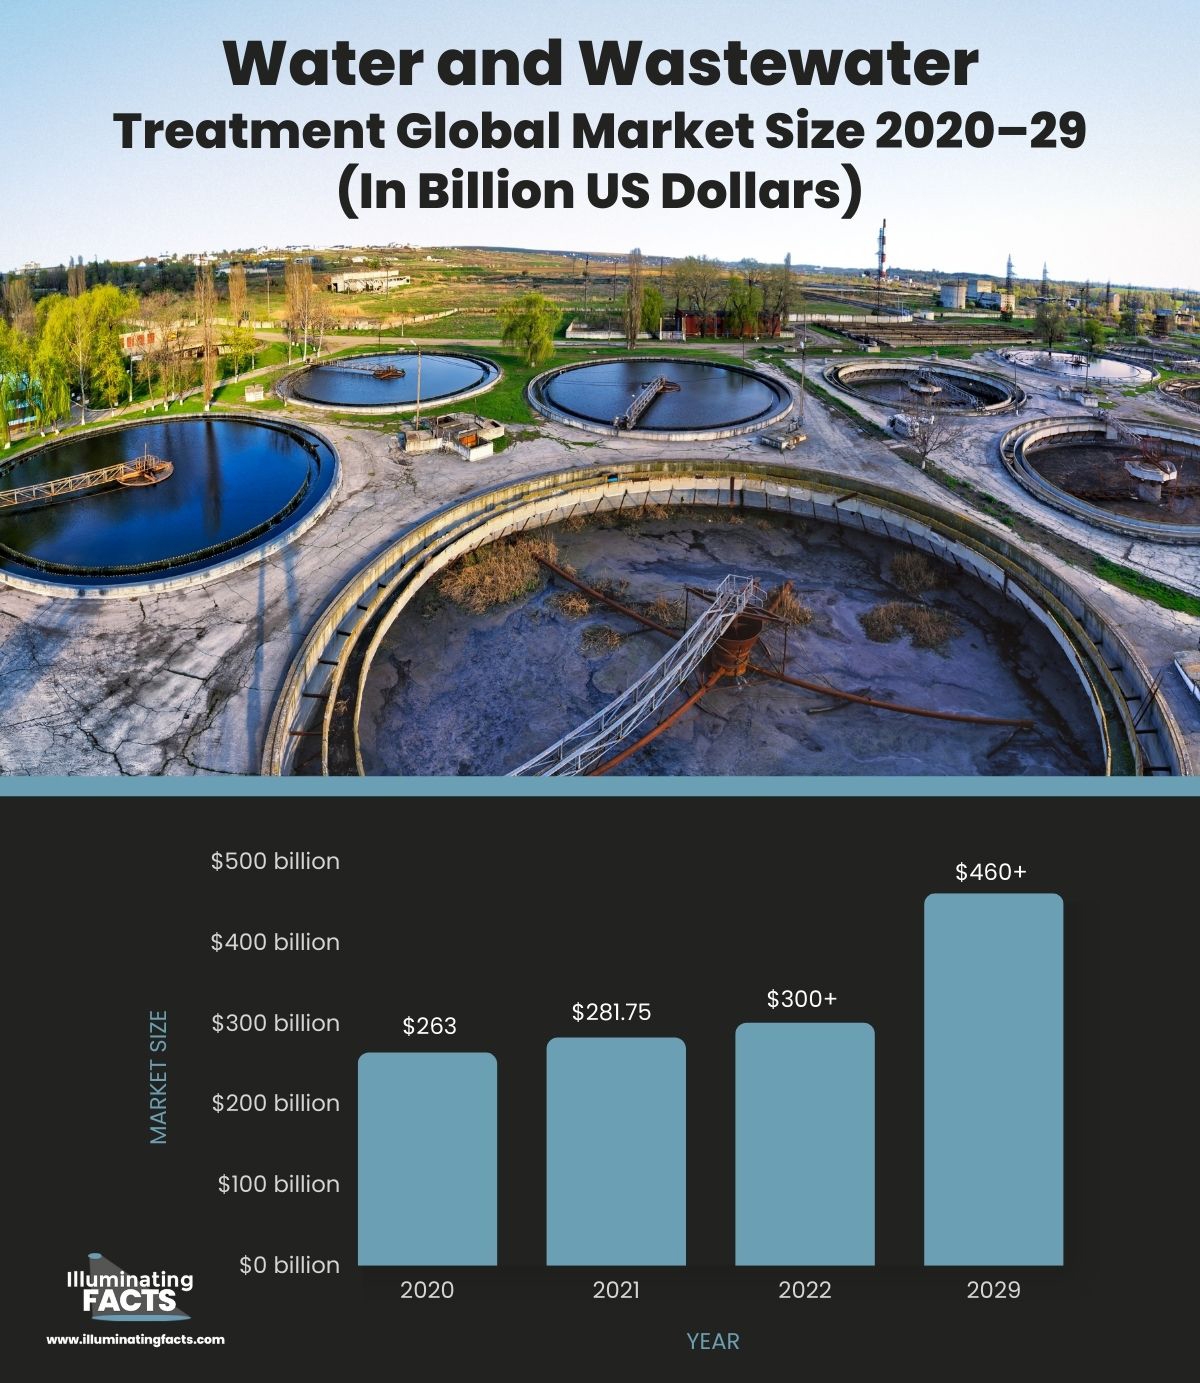 Water and wastewater treatment market size